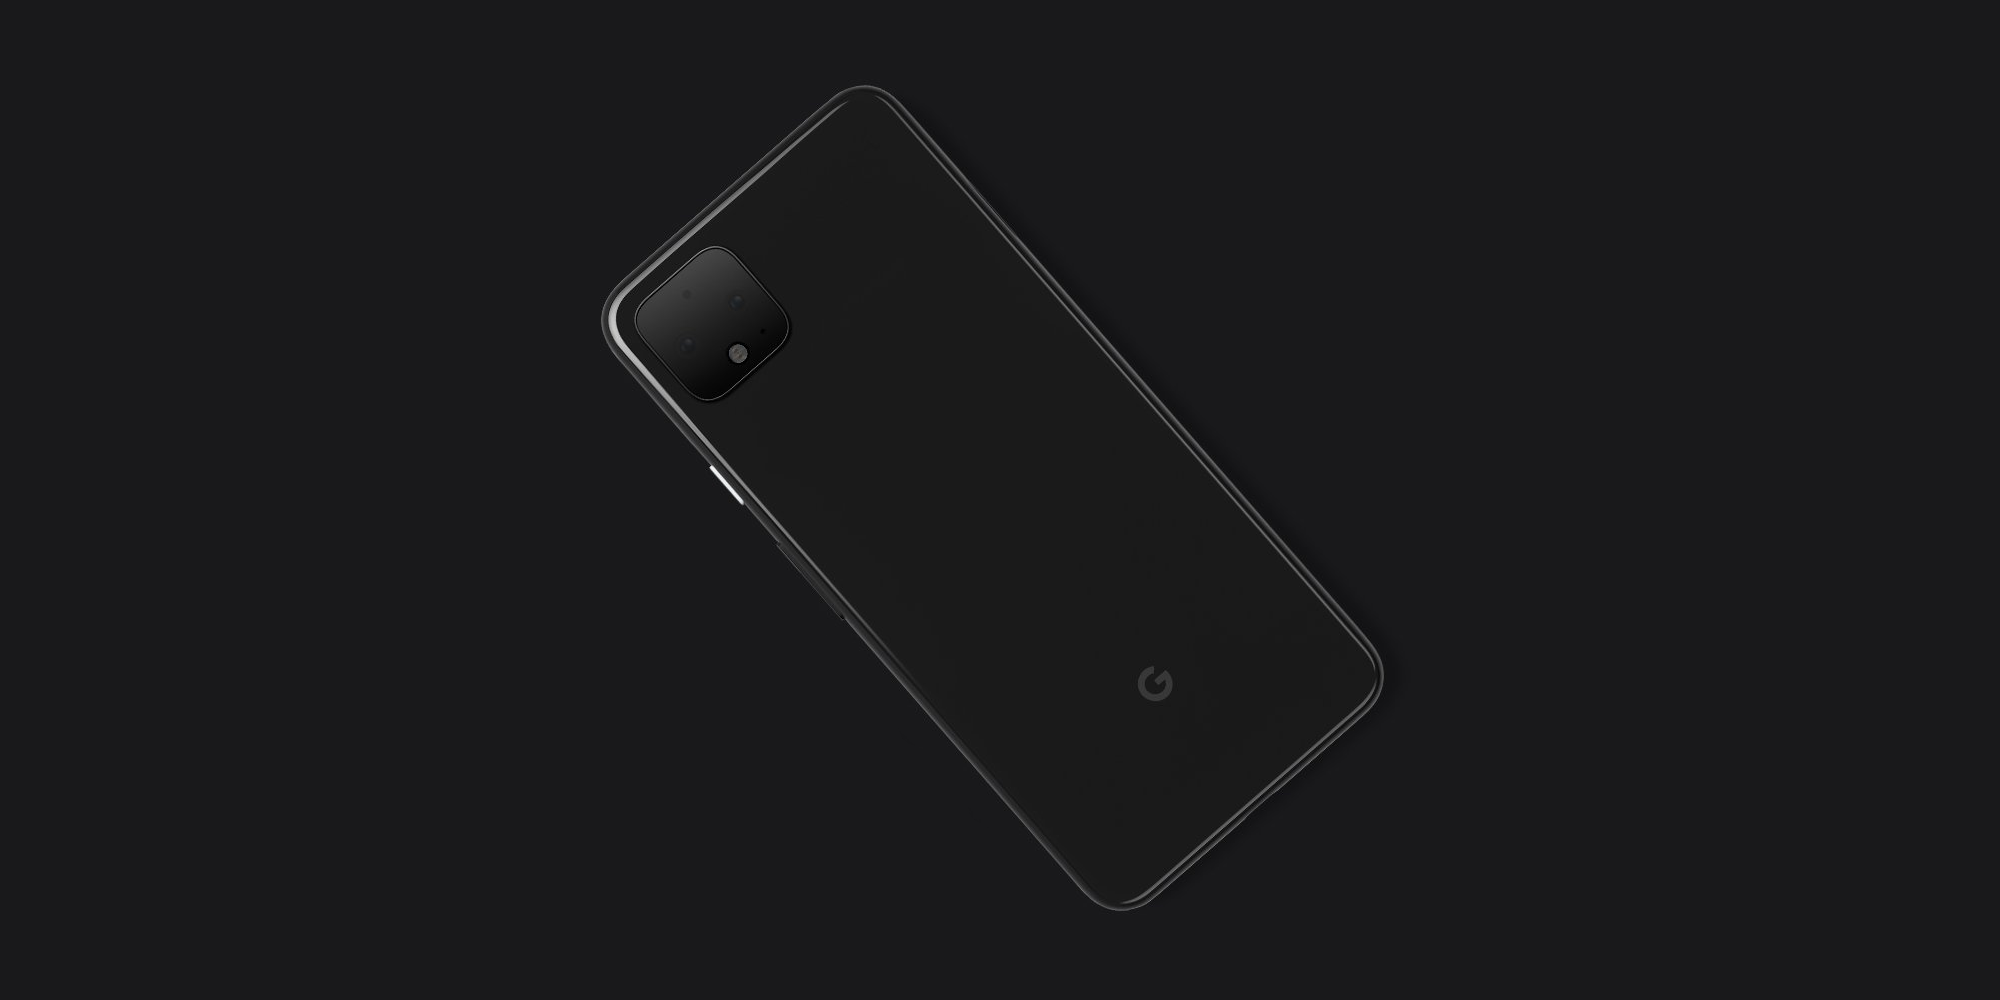 Sketchy Pixel 4 shots show off thin bezels all-around - 9to5Google thumbnail